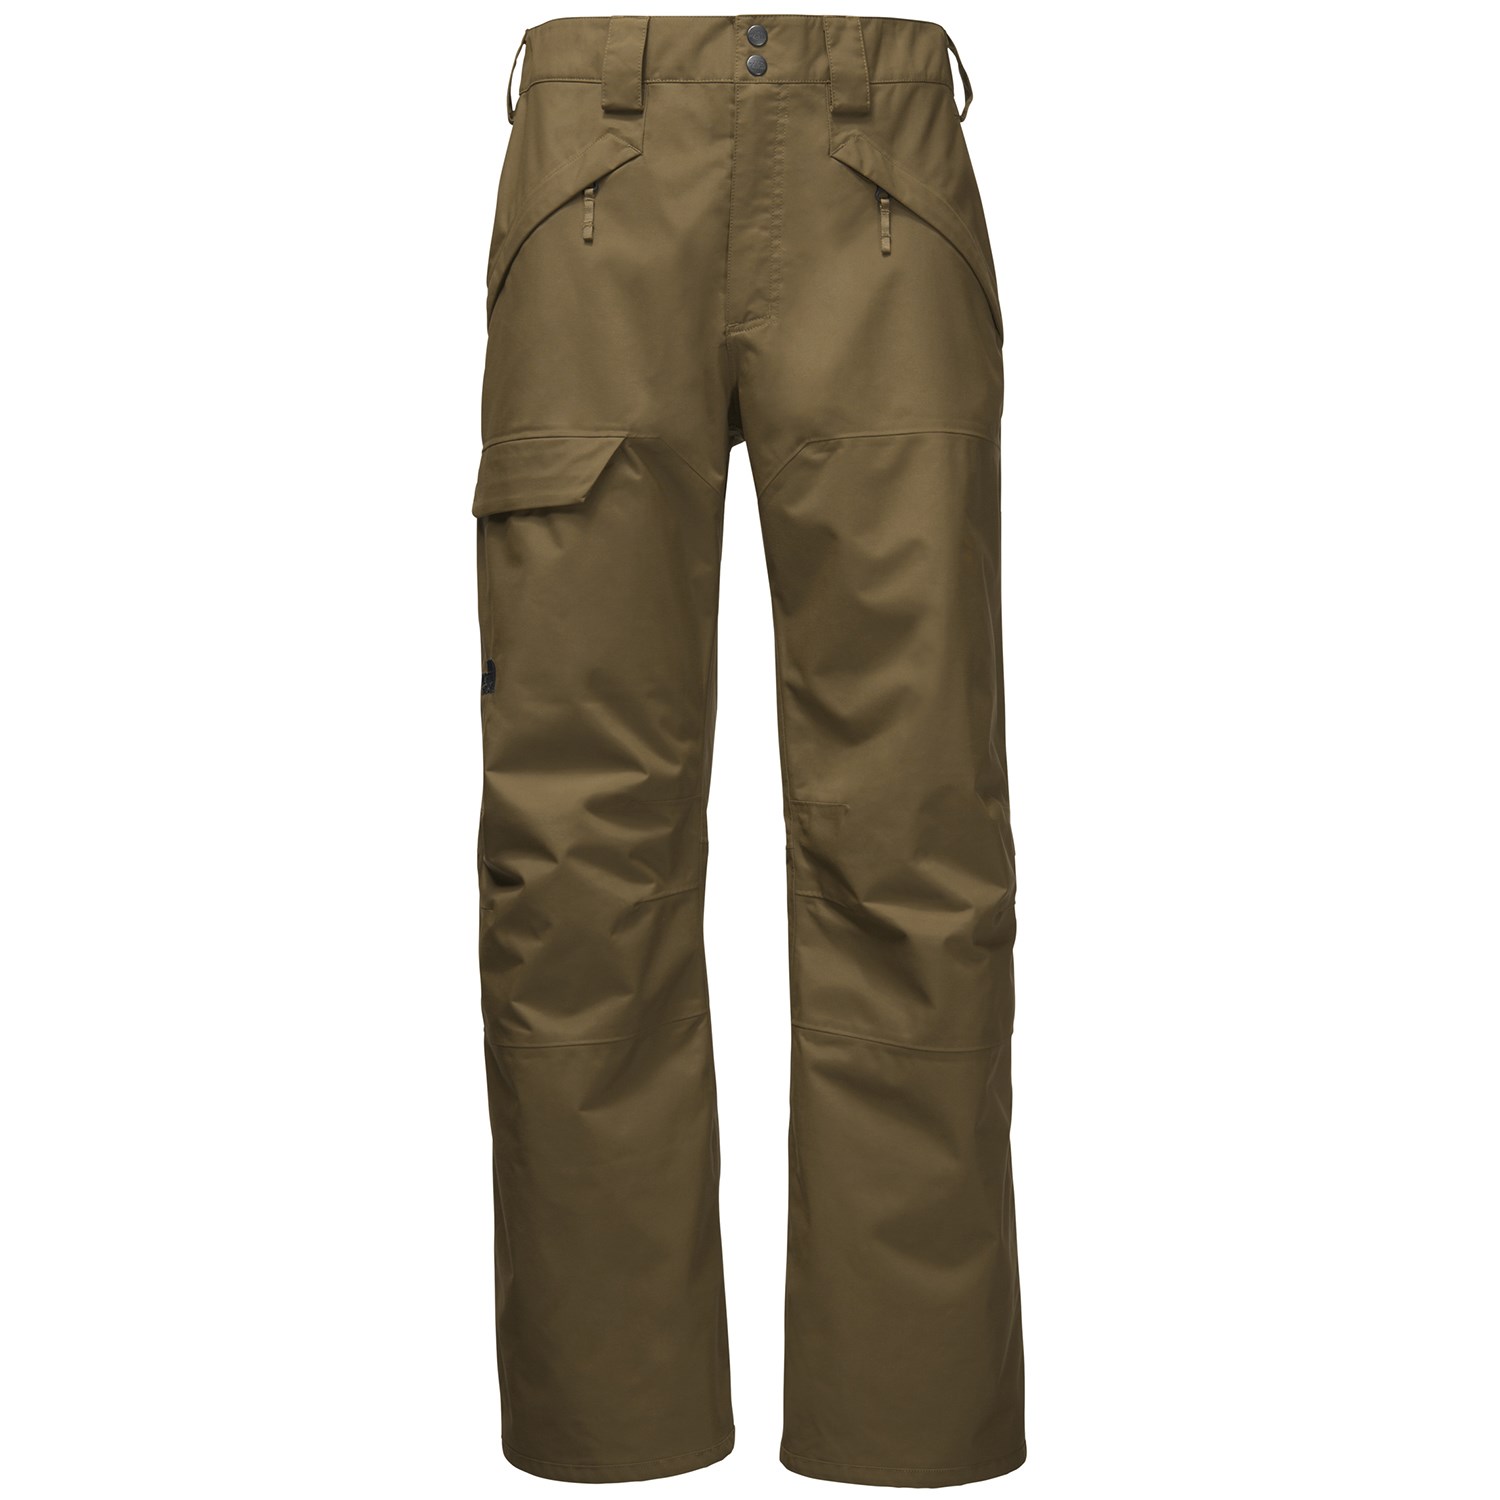 north face seymore pant